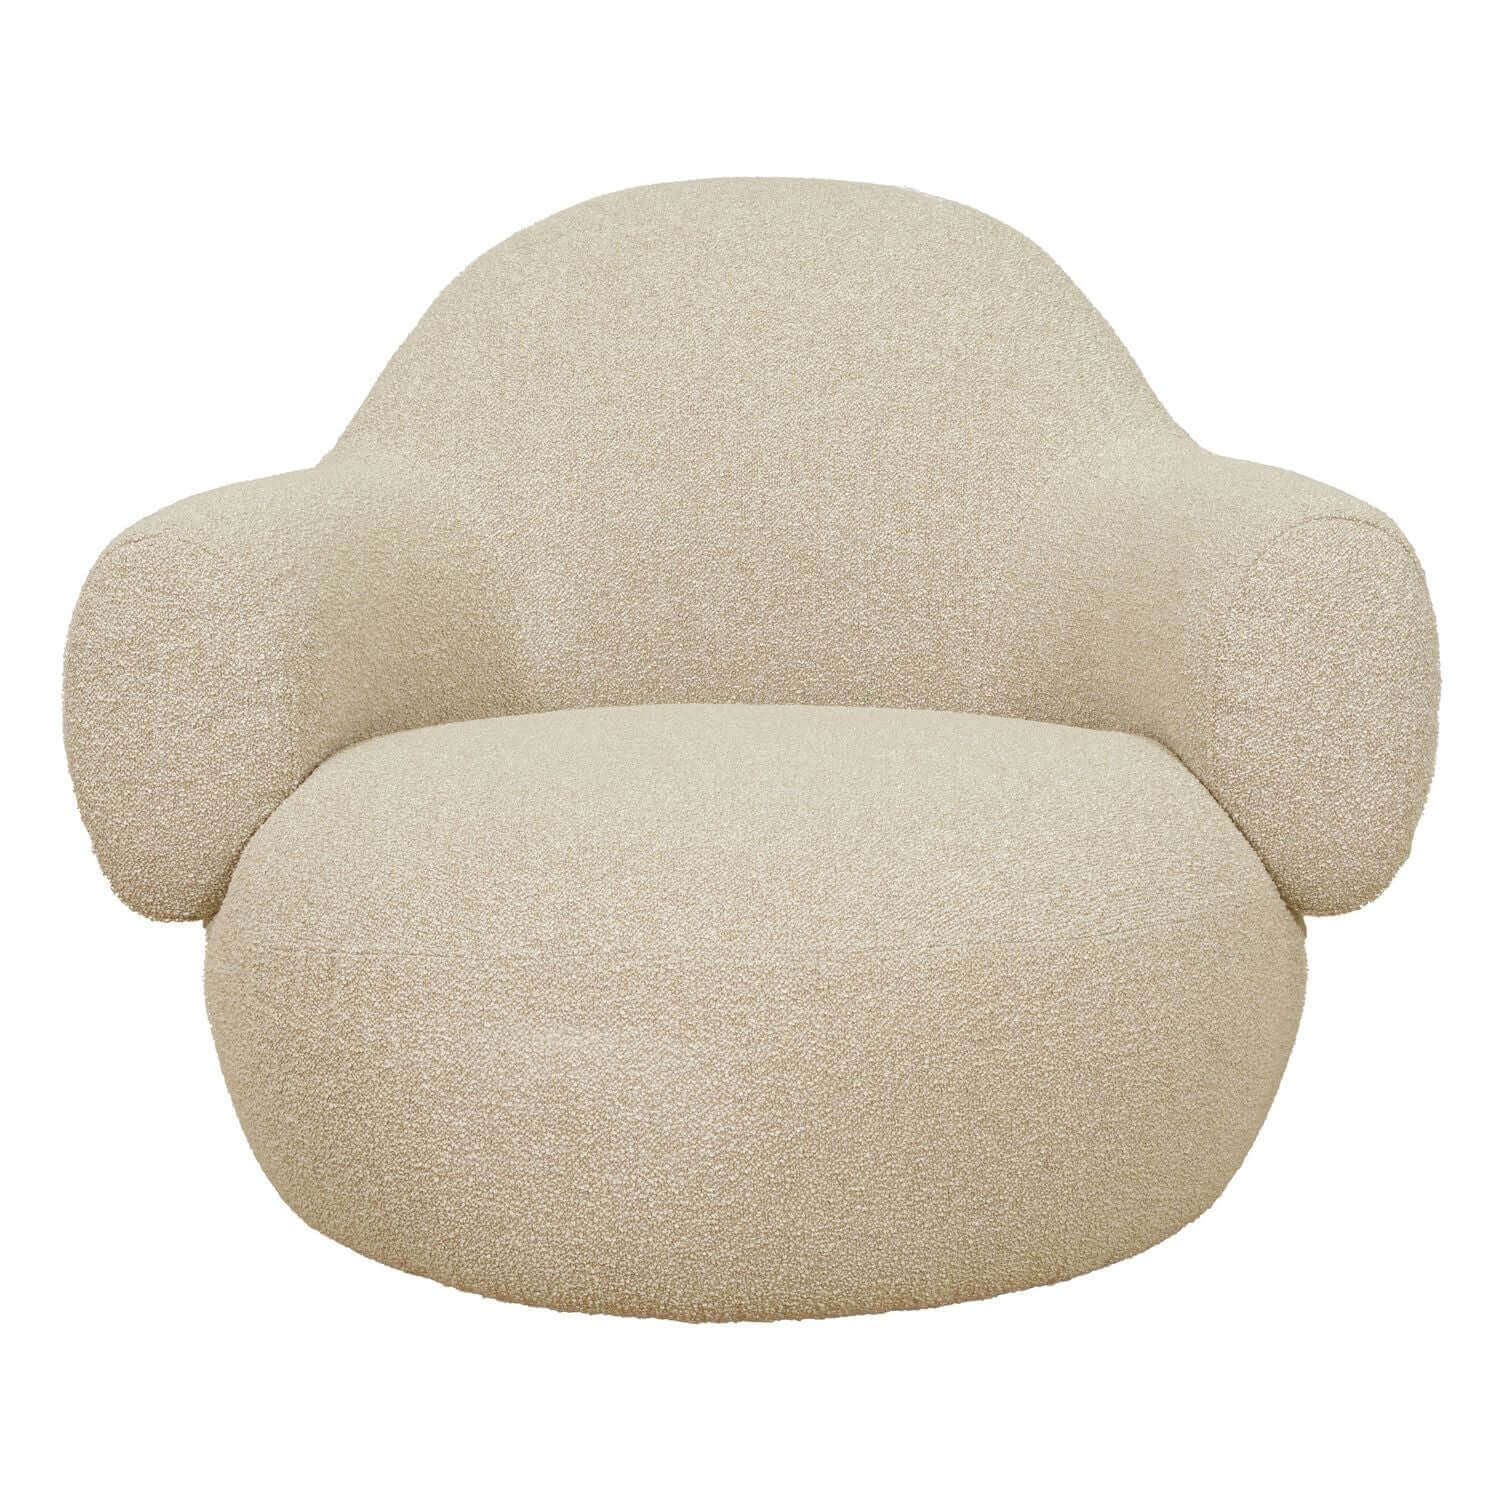 Toad Lounge Chair